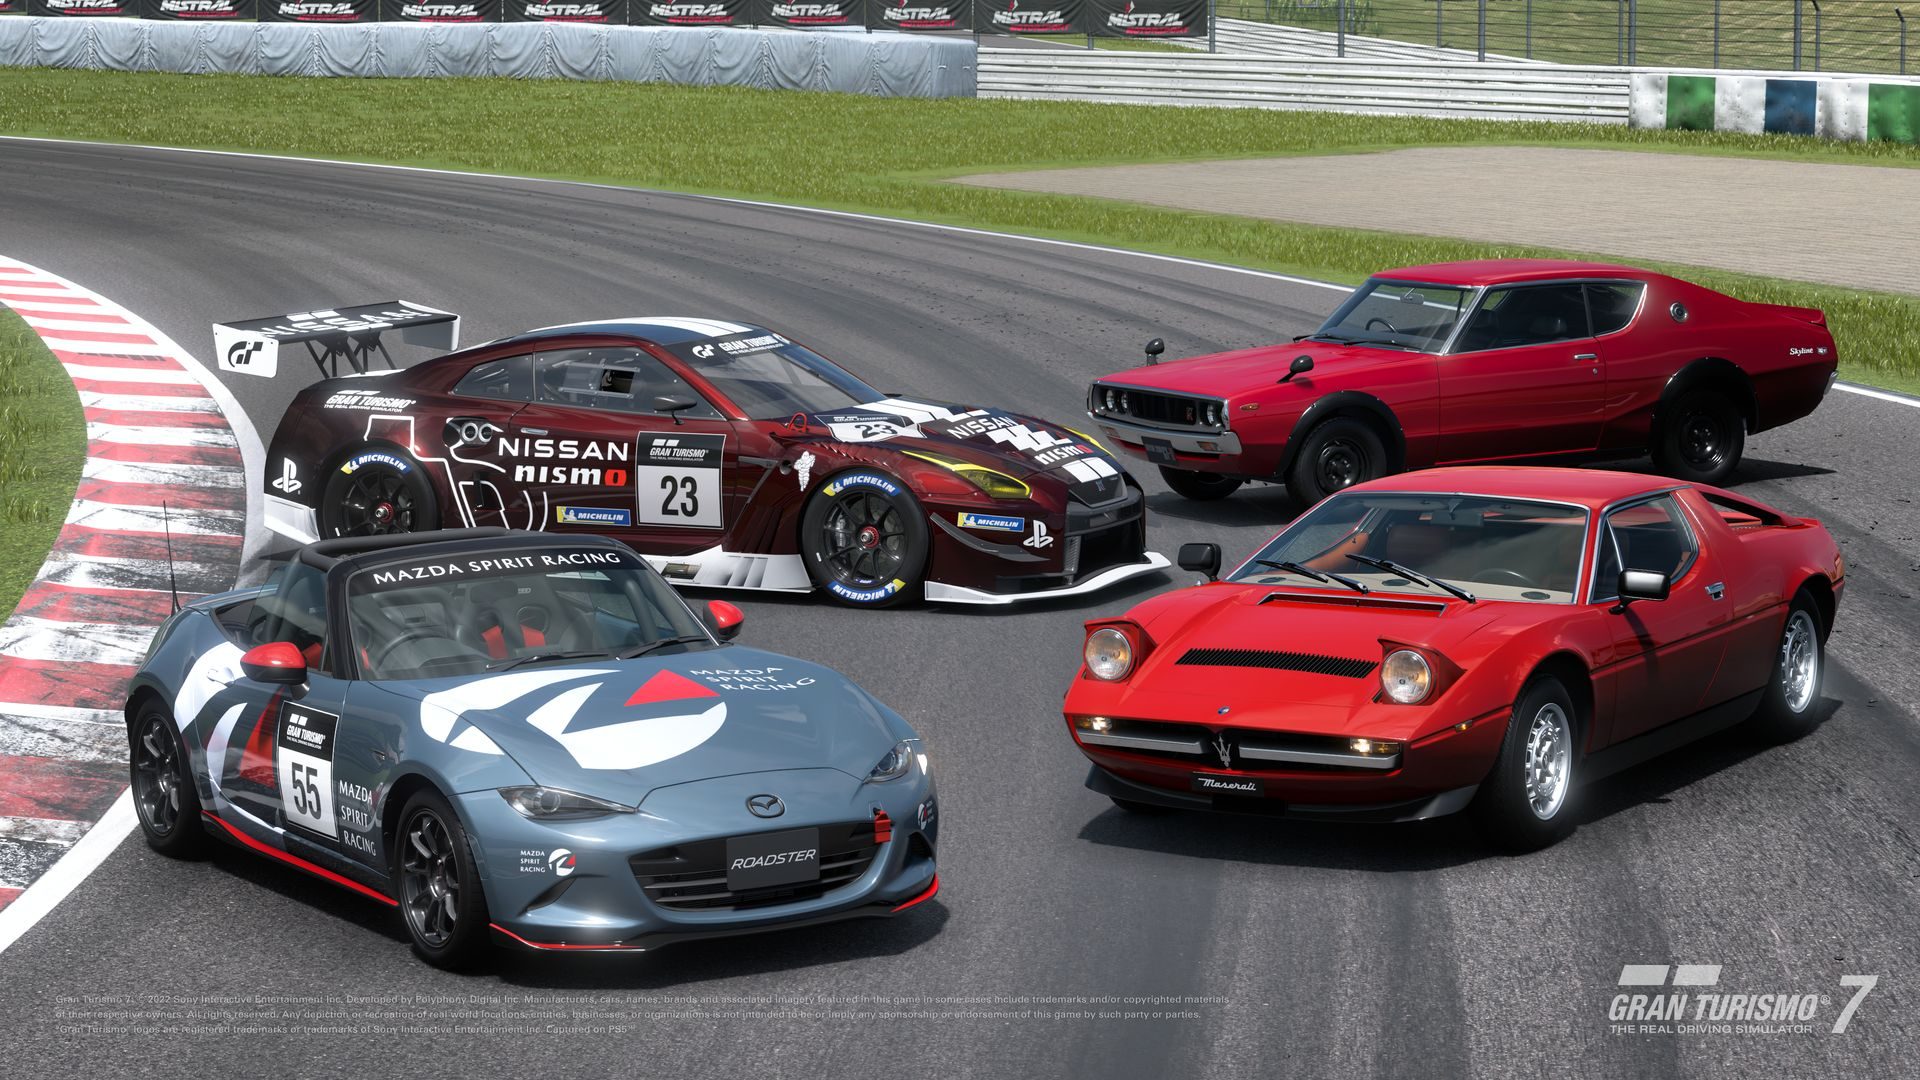 Introducing the 'Gran Turismo 7' July Update: Adding Three New Cars,  Including Classic Race Cars 